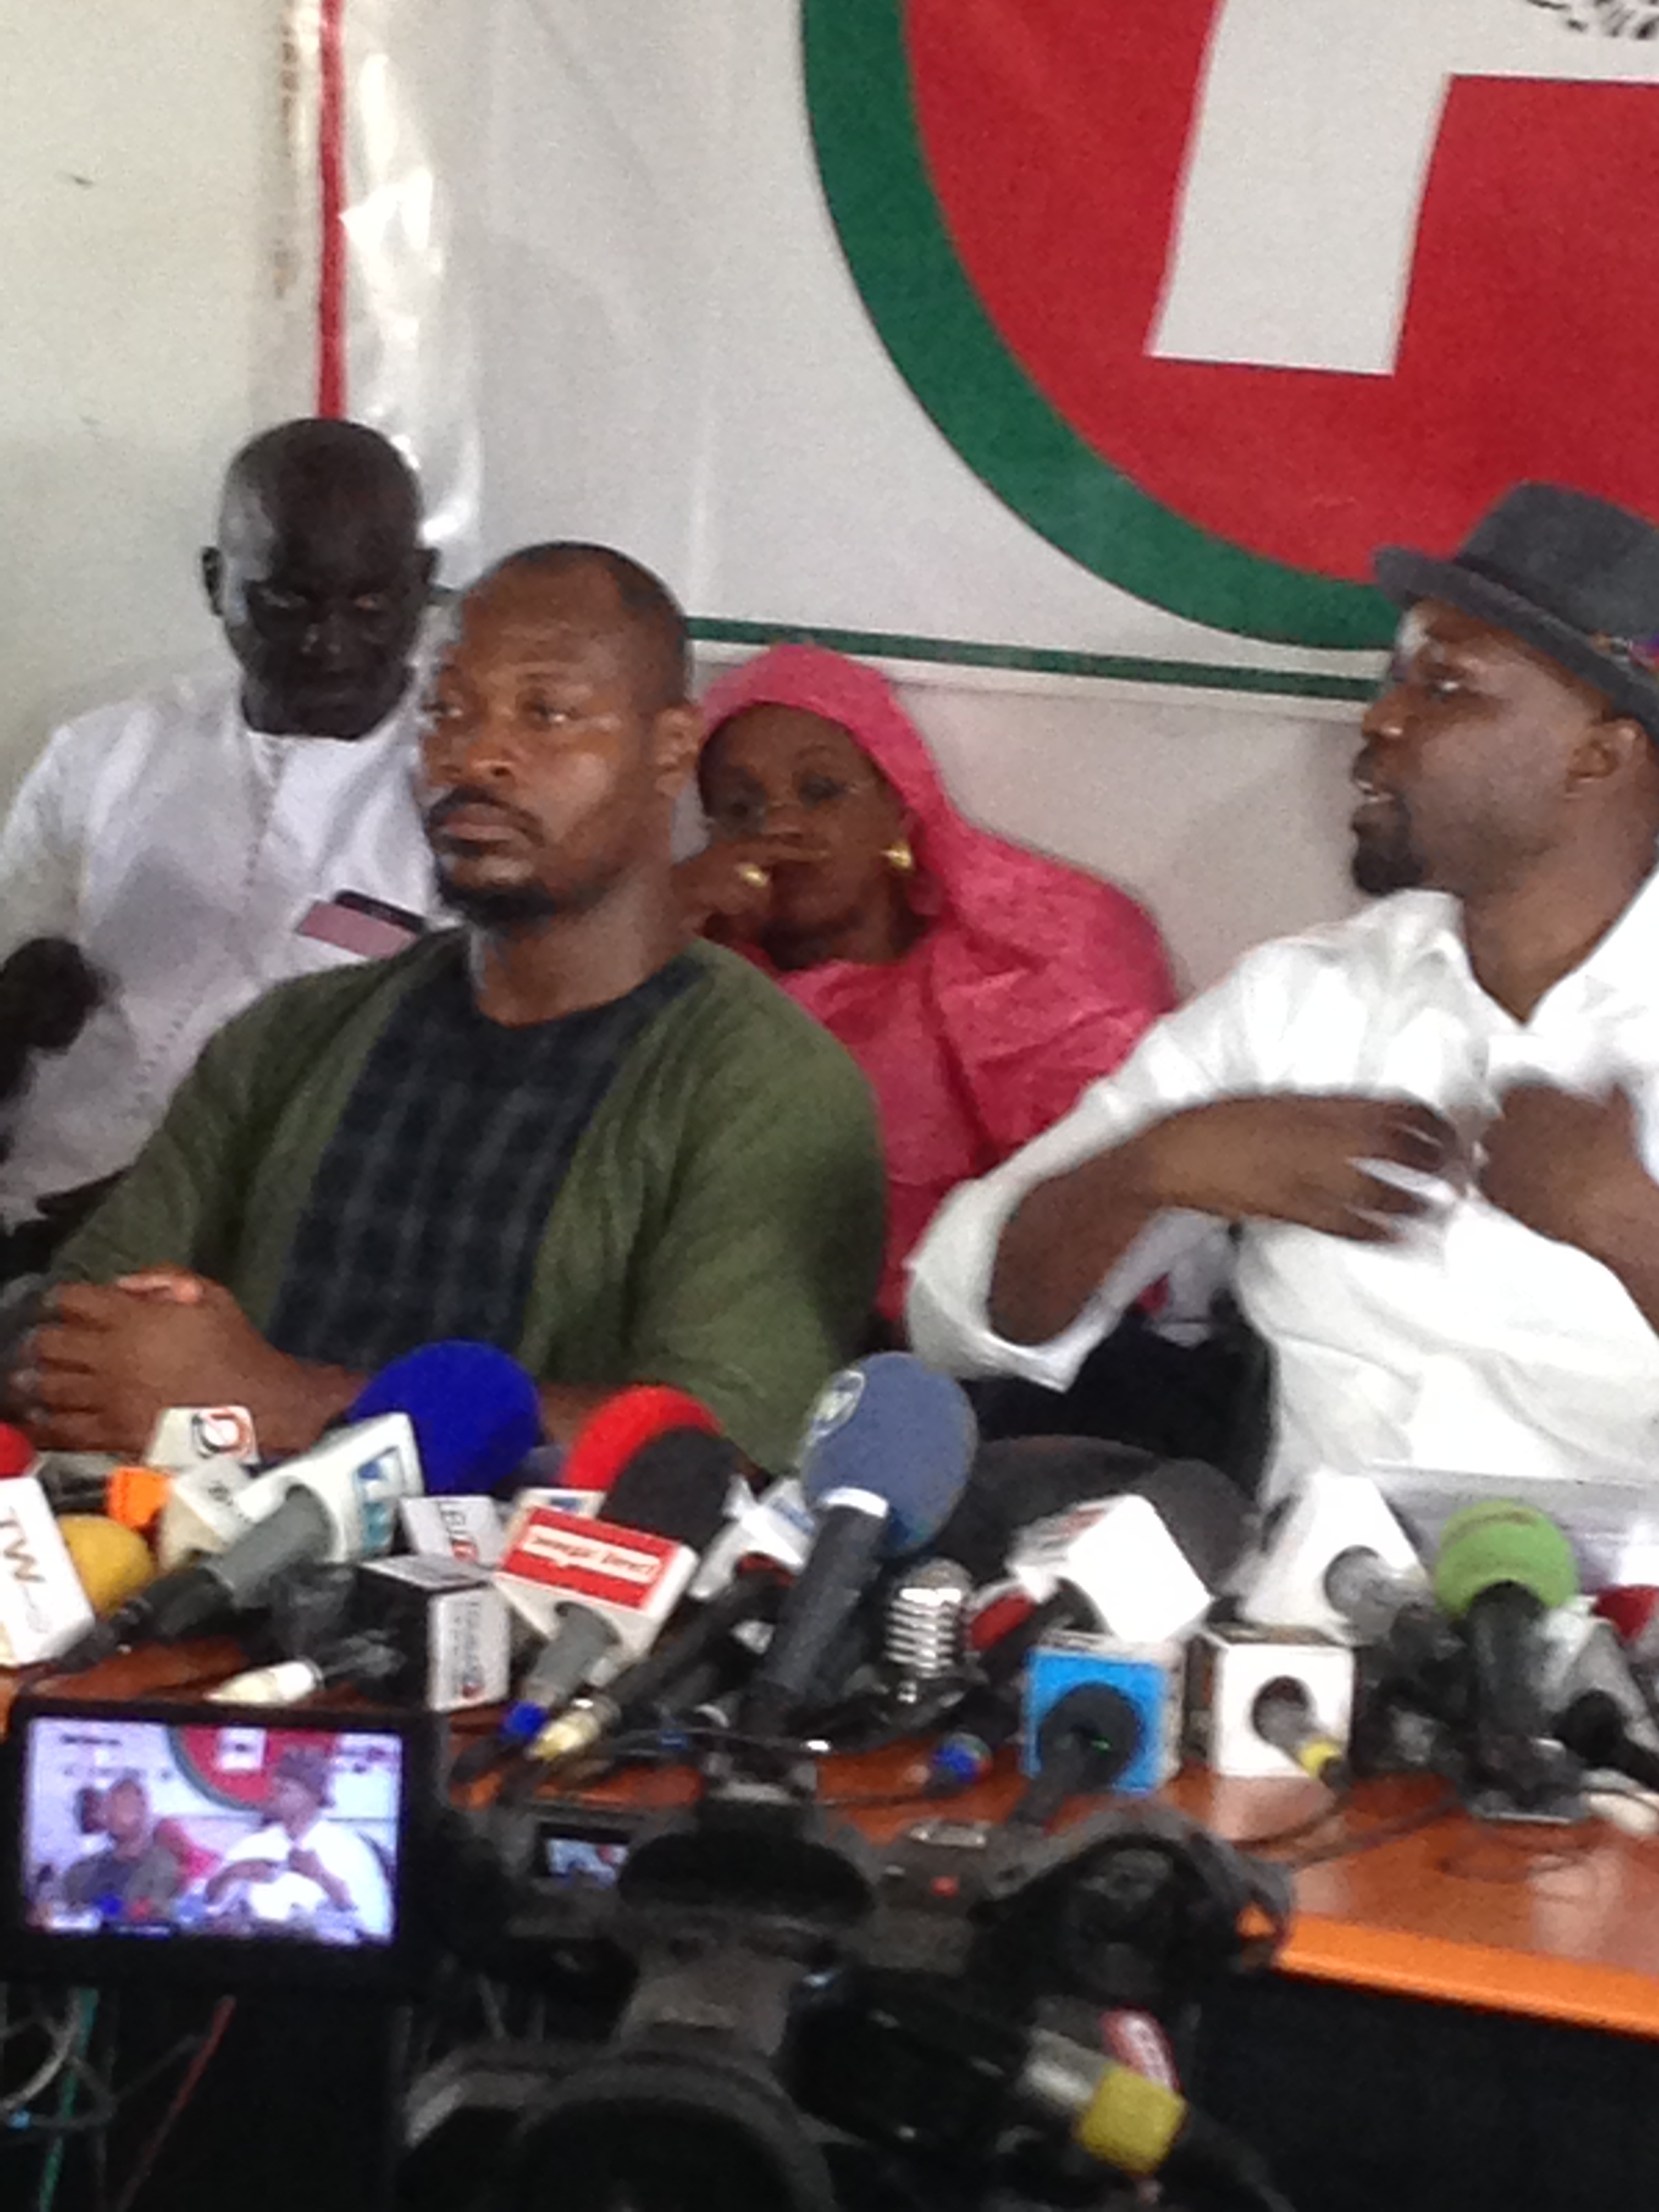 REPLAY - CONFERENCE DE PRESSE OUSMANE SONKO (VIDEO + IMAGES)